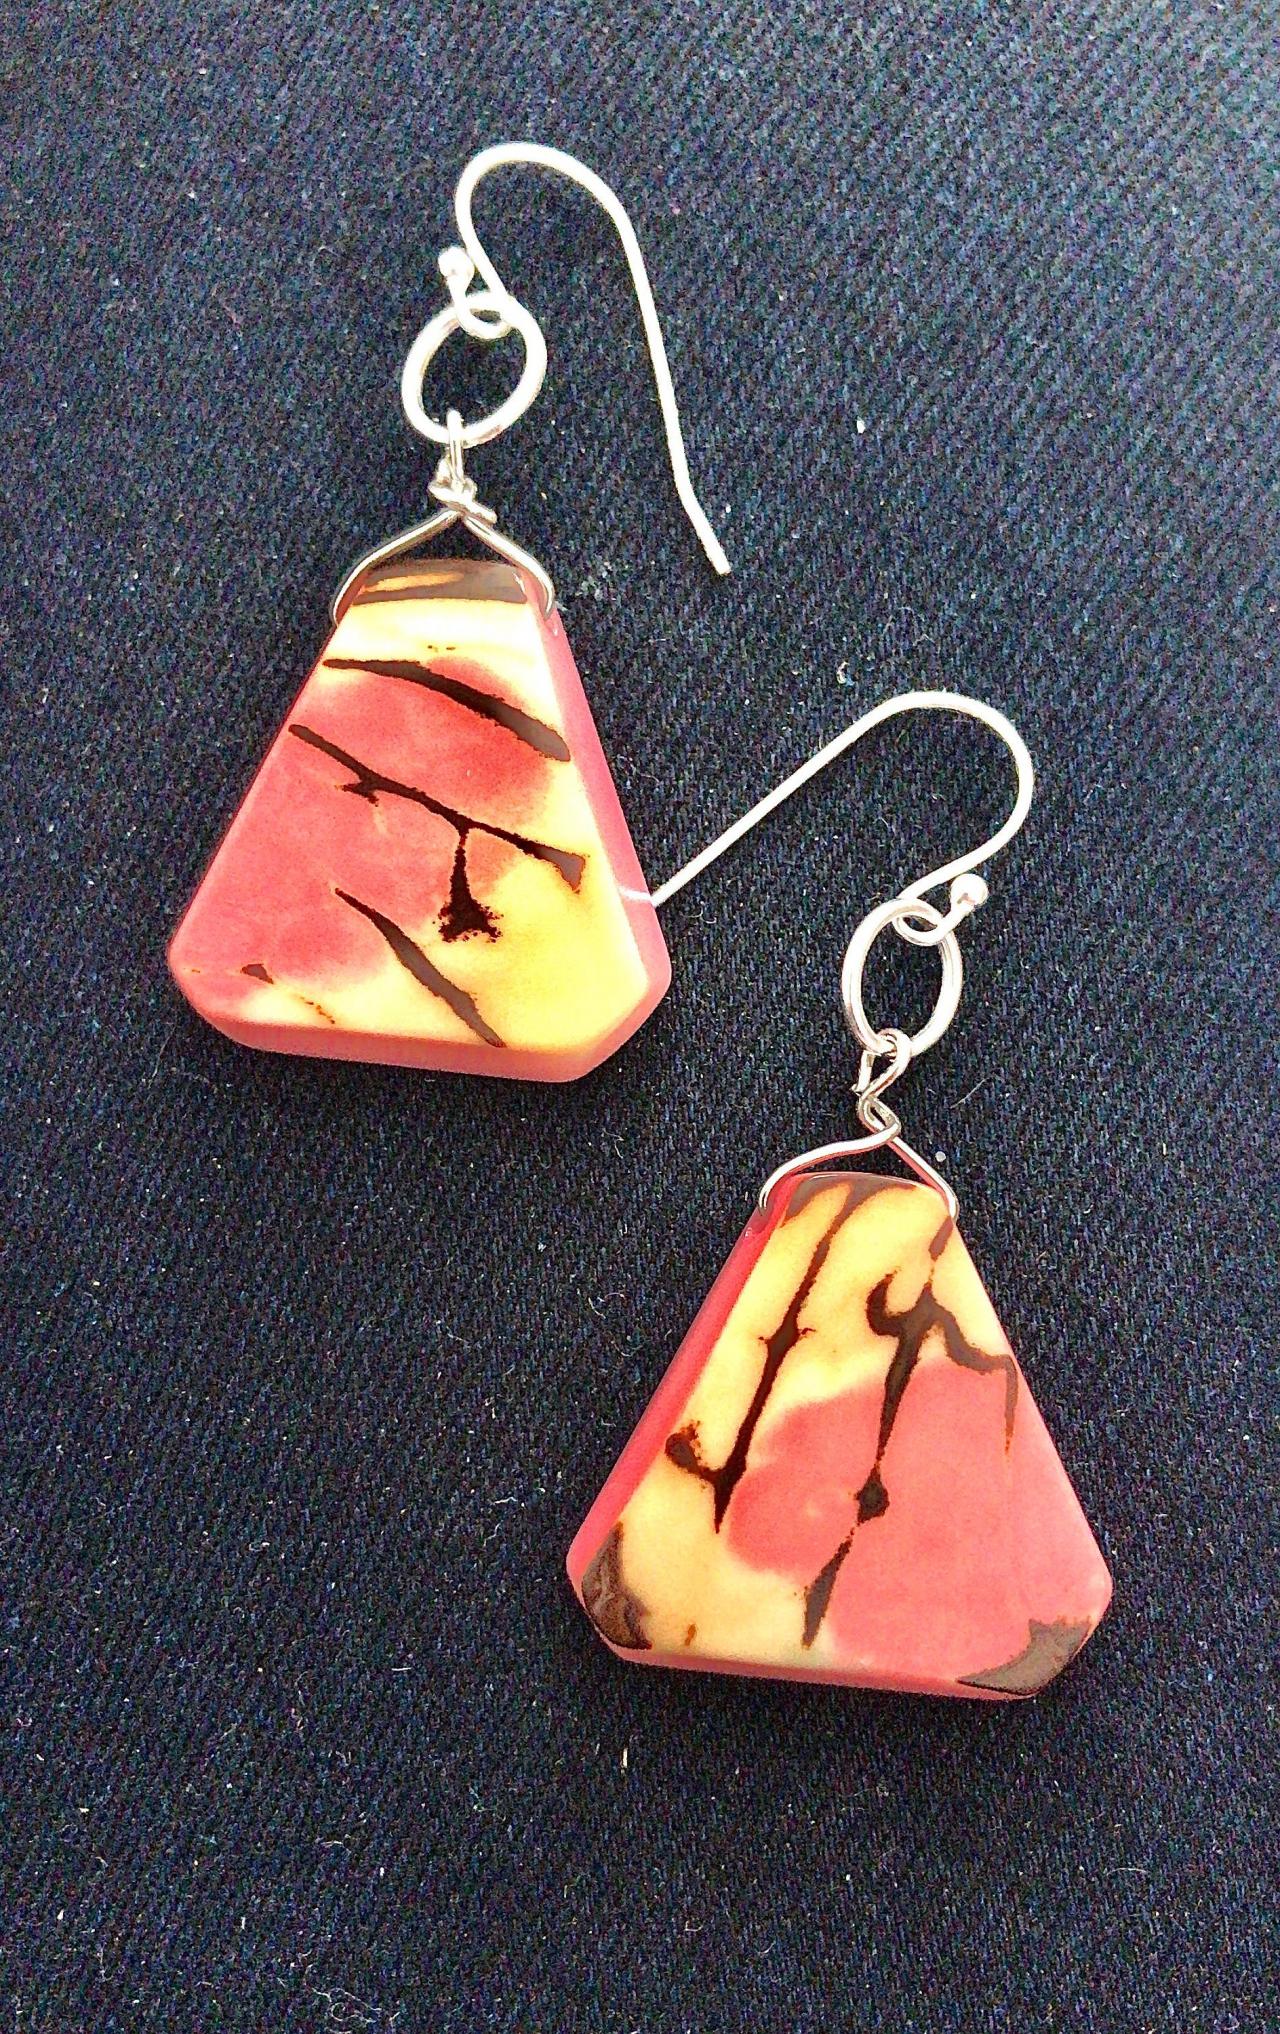 Pink & Cream Stripey Tagua Nut (vegetable Ivory) Dangle Earrings With Sterling Silver Wires.